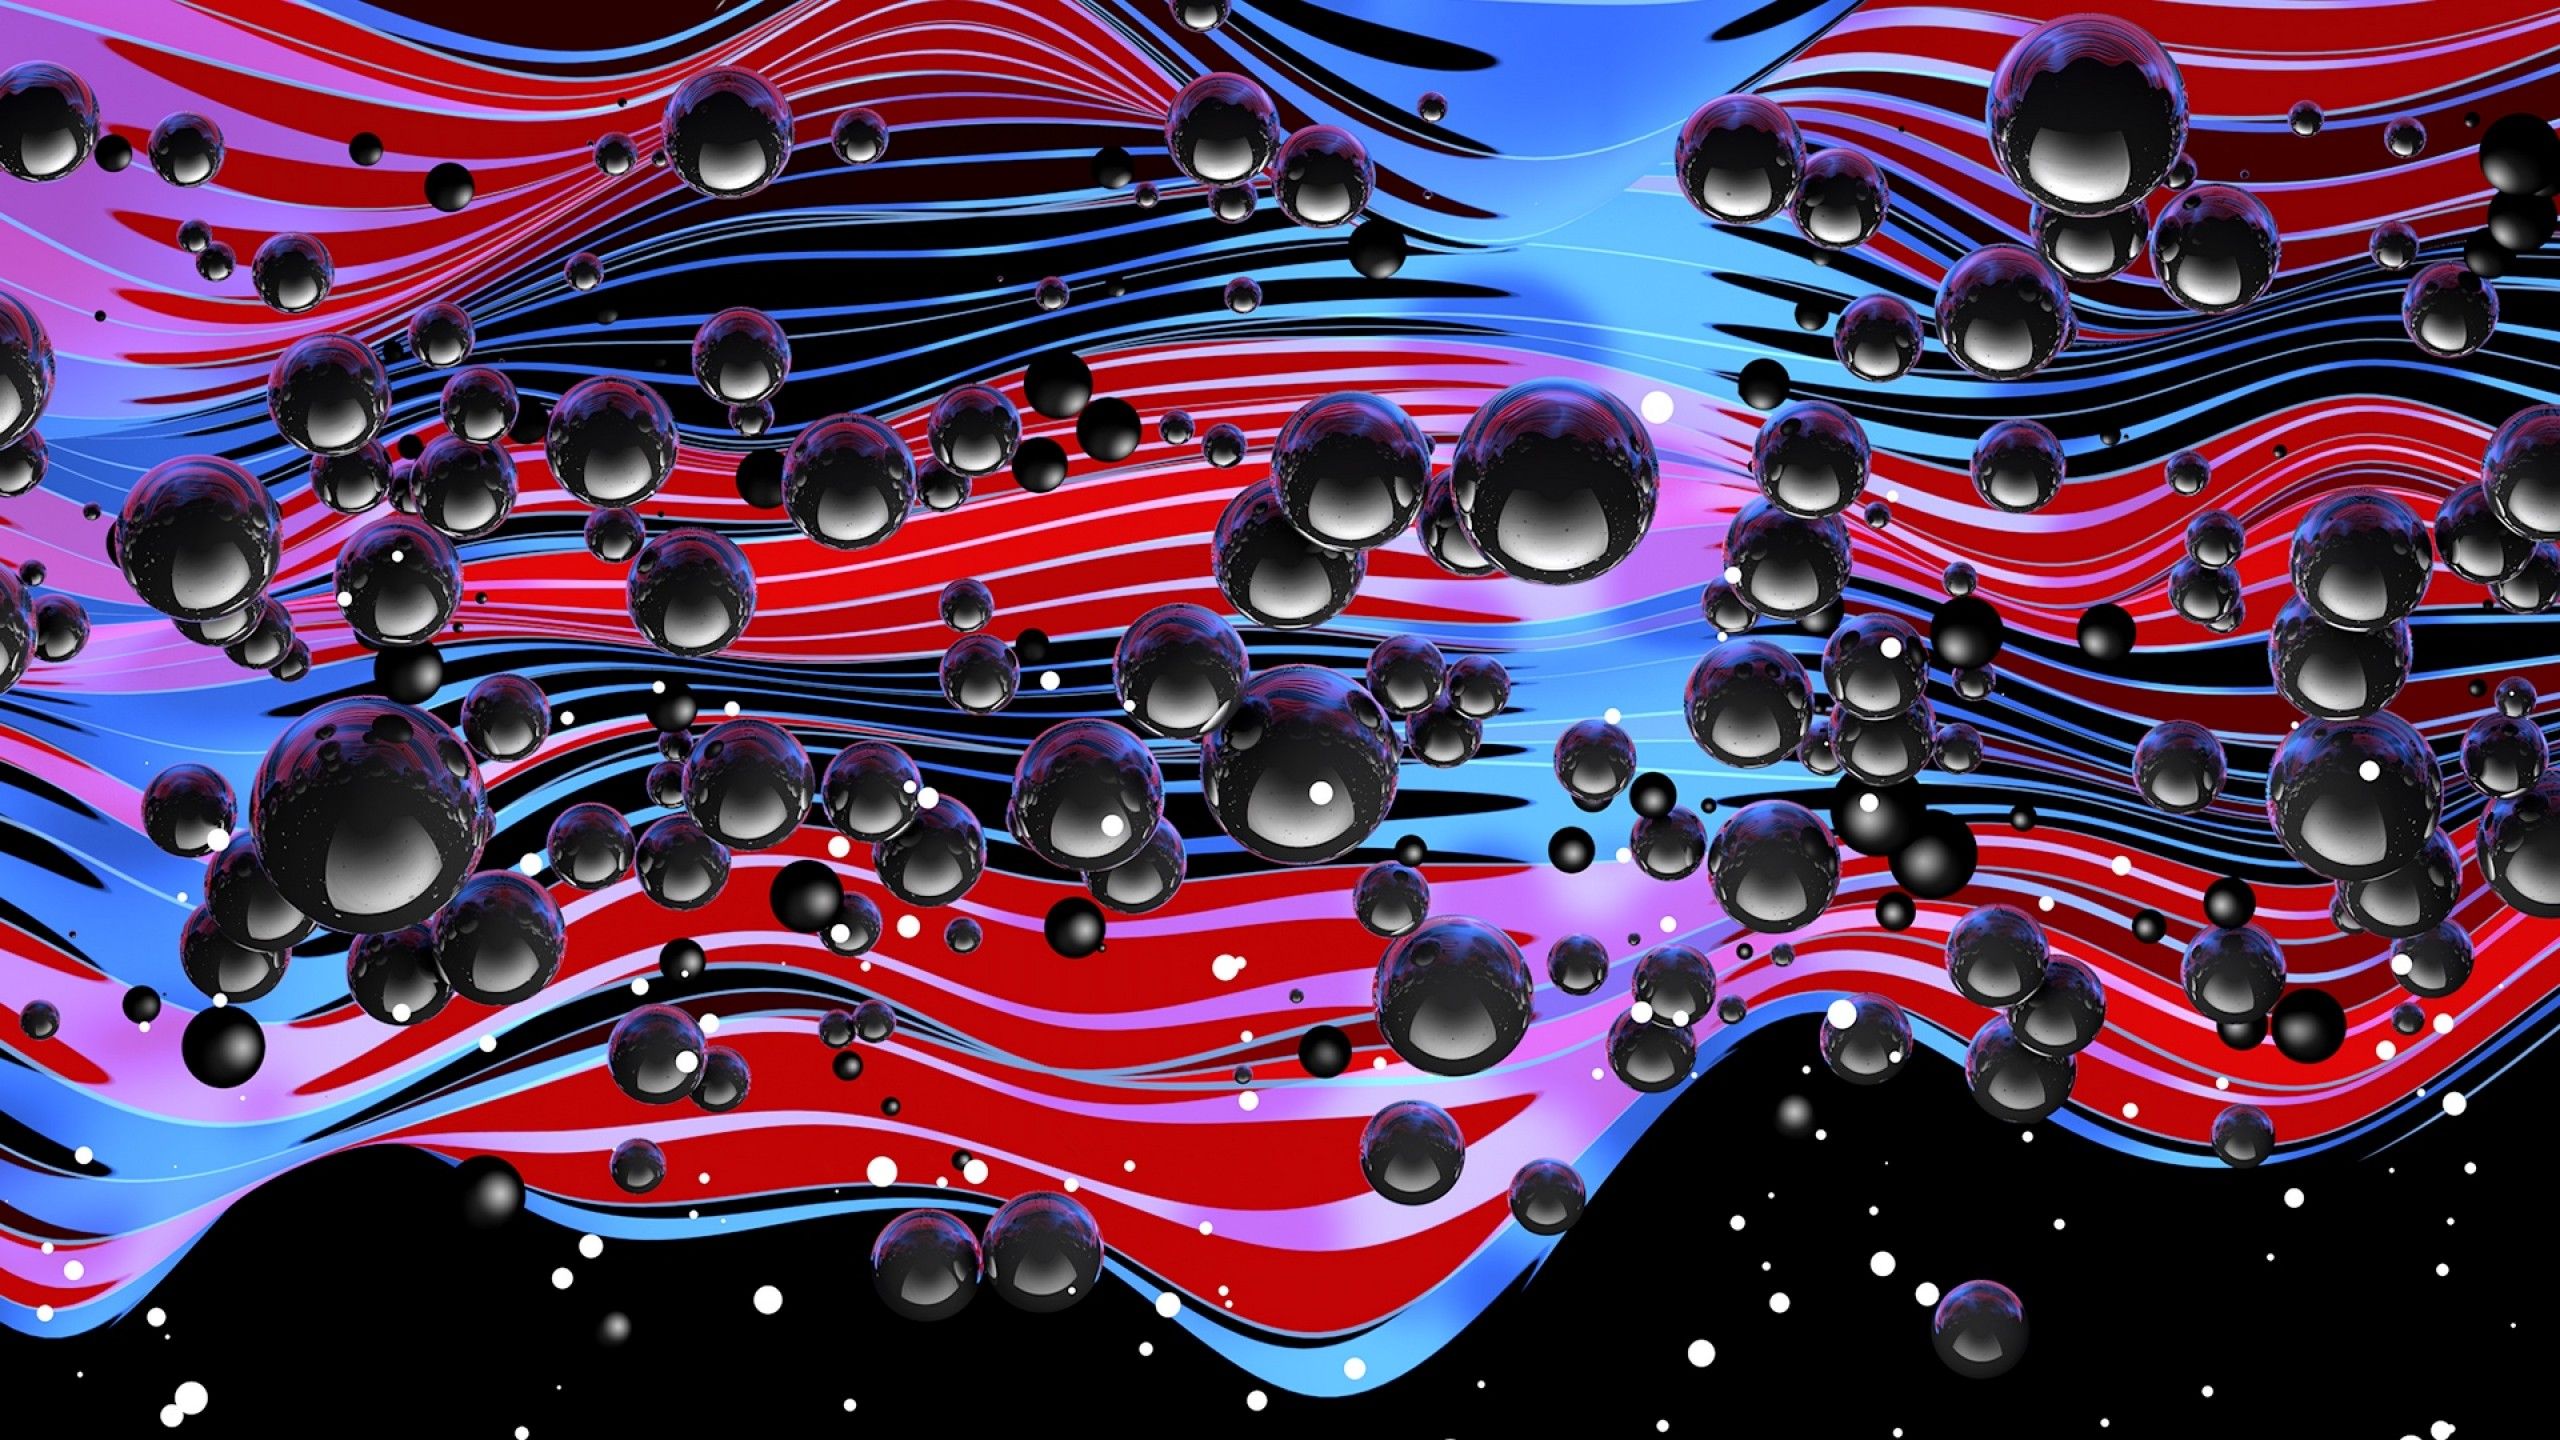 Bubbles over wavy lines HD Wallpaper Youtube Cover Photo